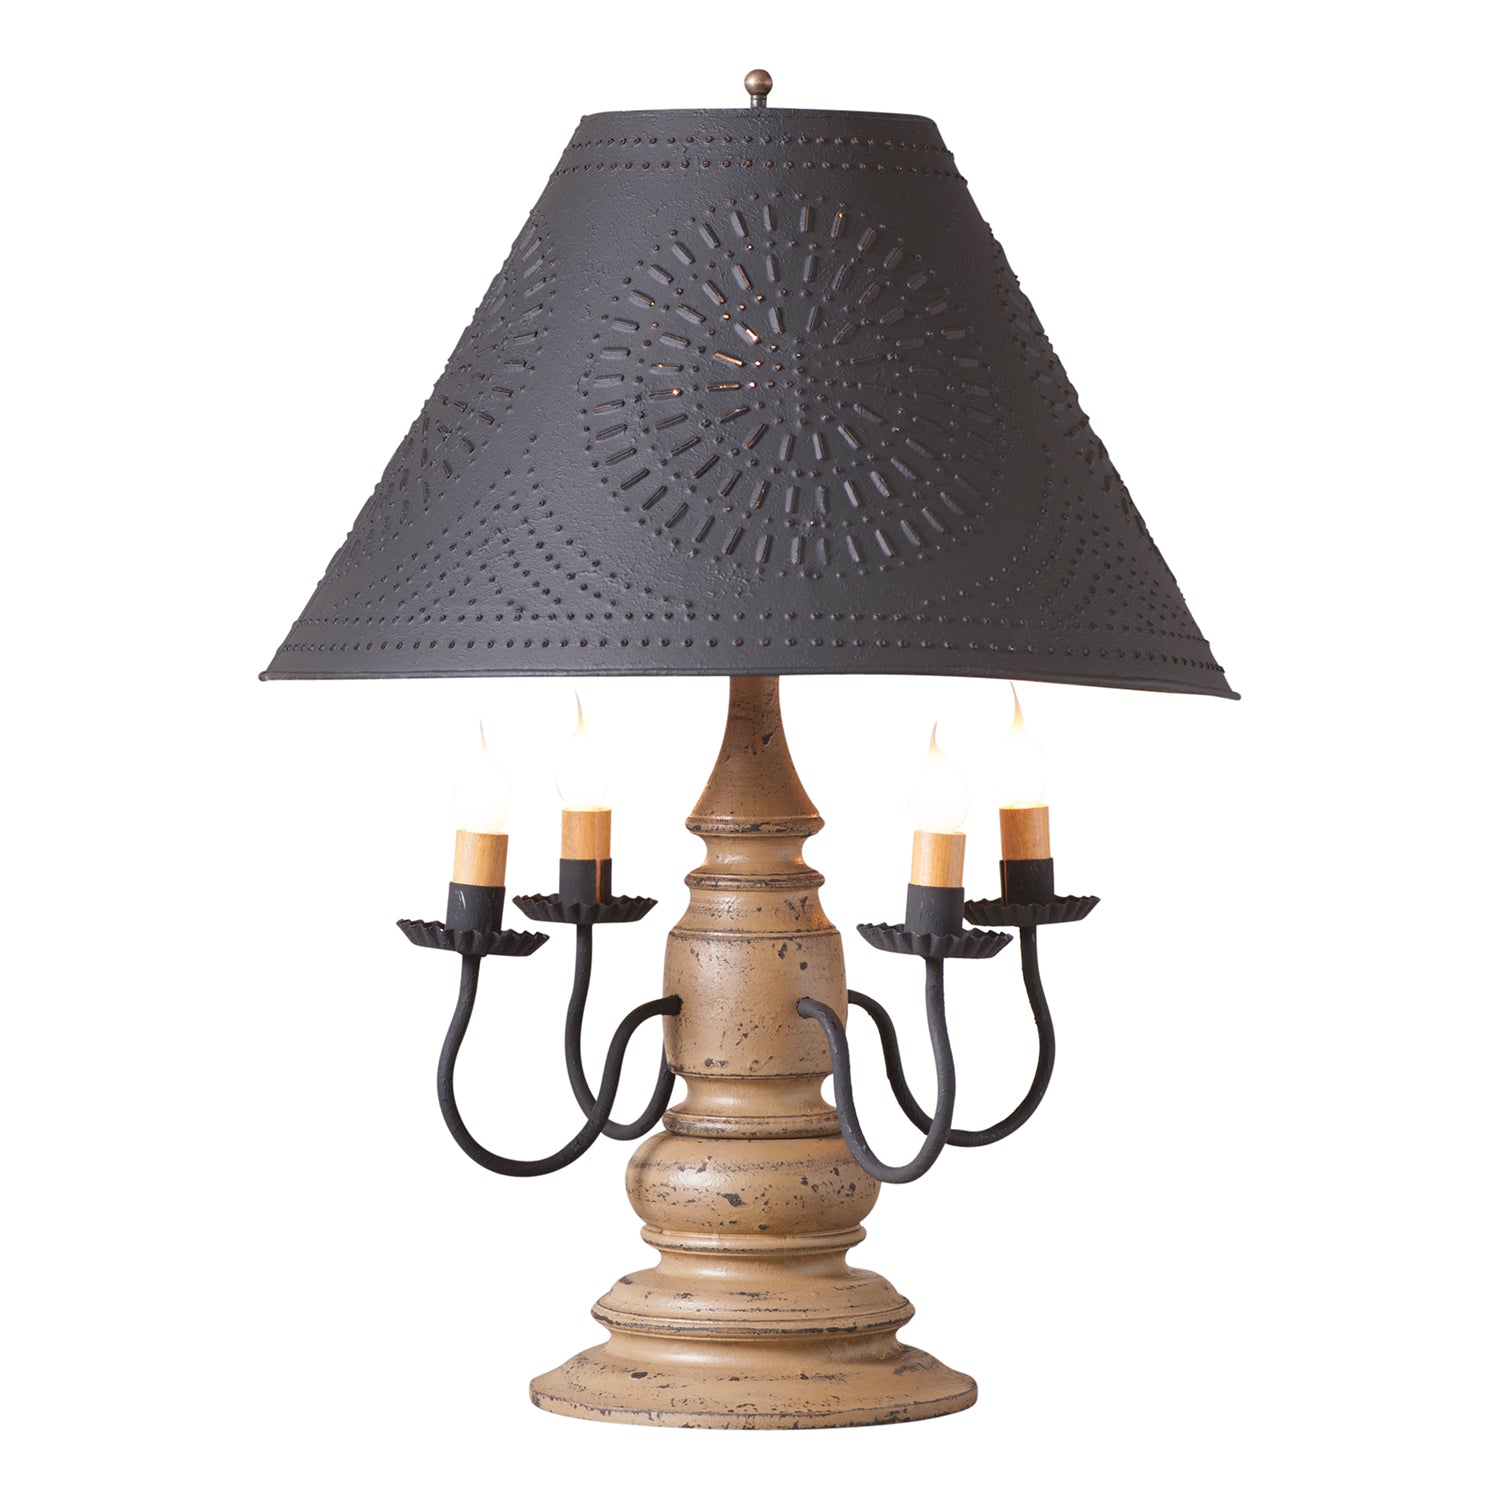 Harrison Lamp in Americana Pearwood with Textured Black Tin Shade